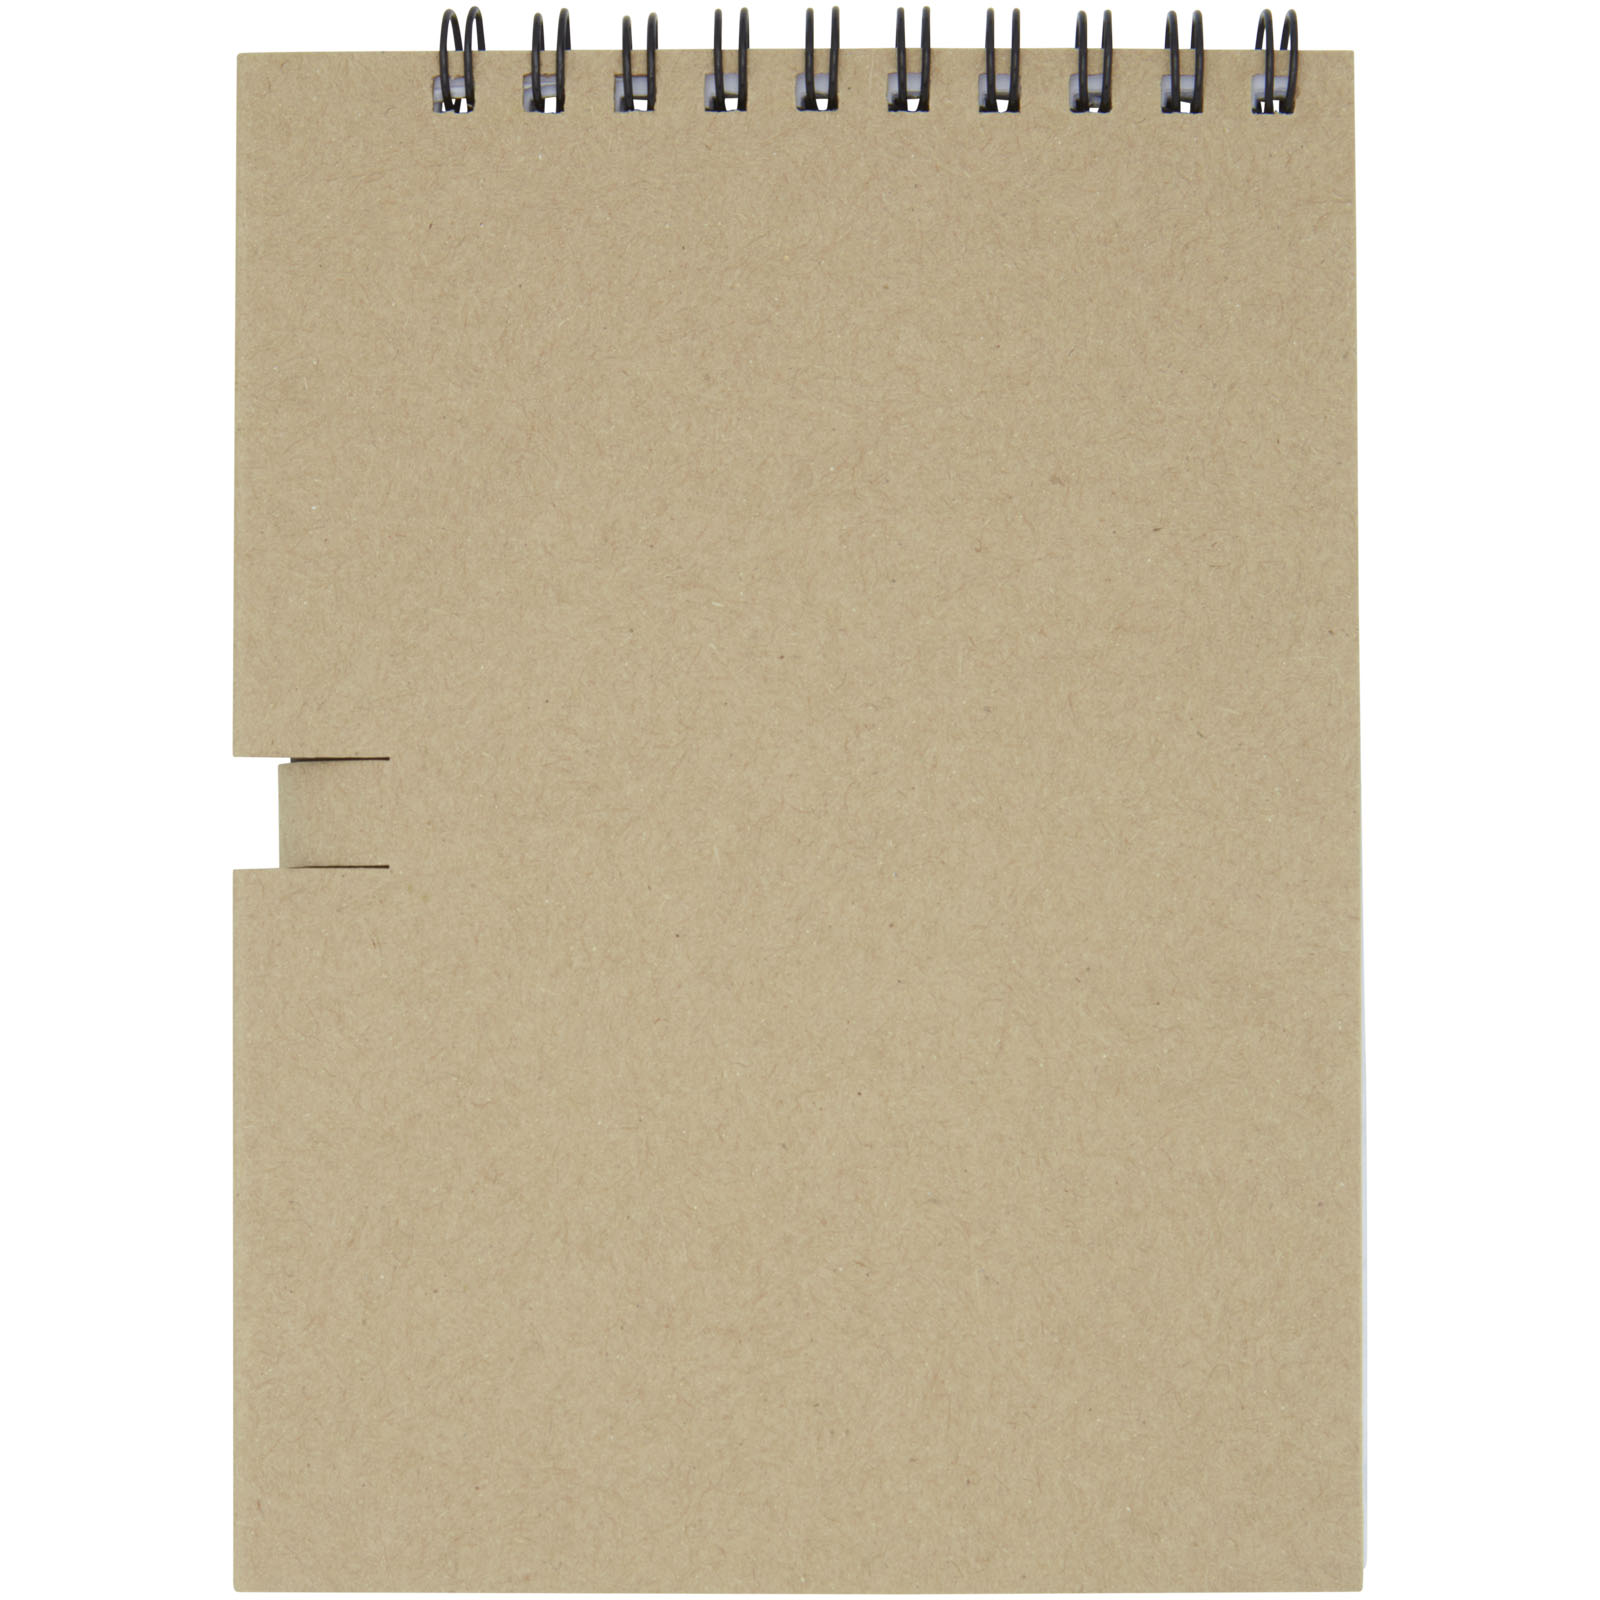 Advertising Notebooks - Luciano Eco wire notebook with pencil - small - 2